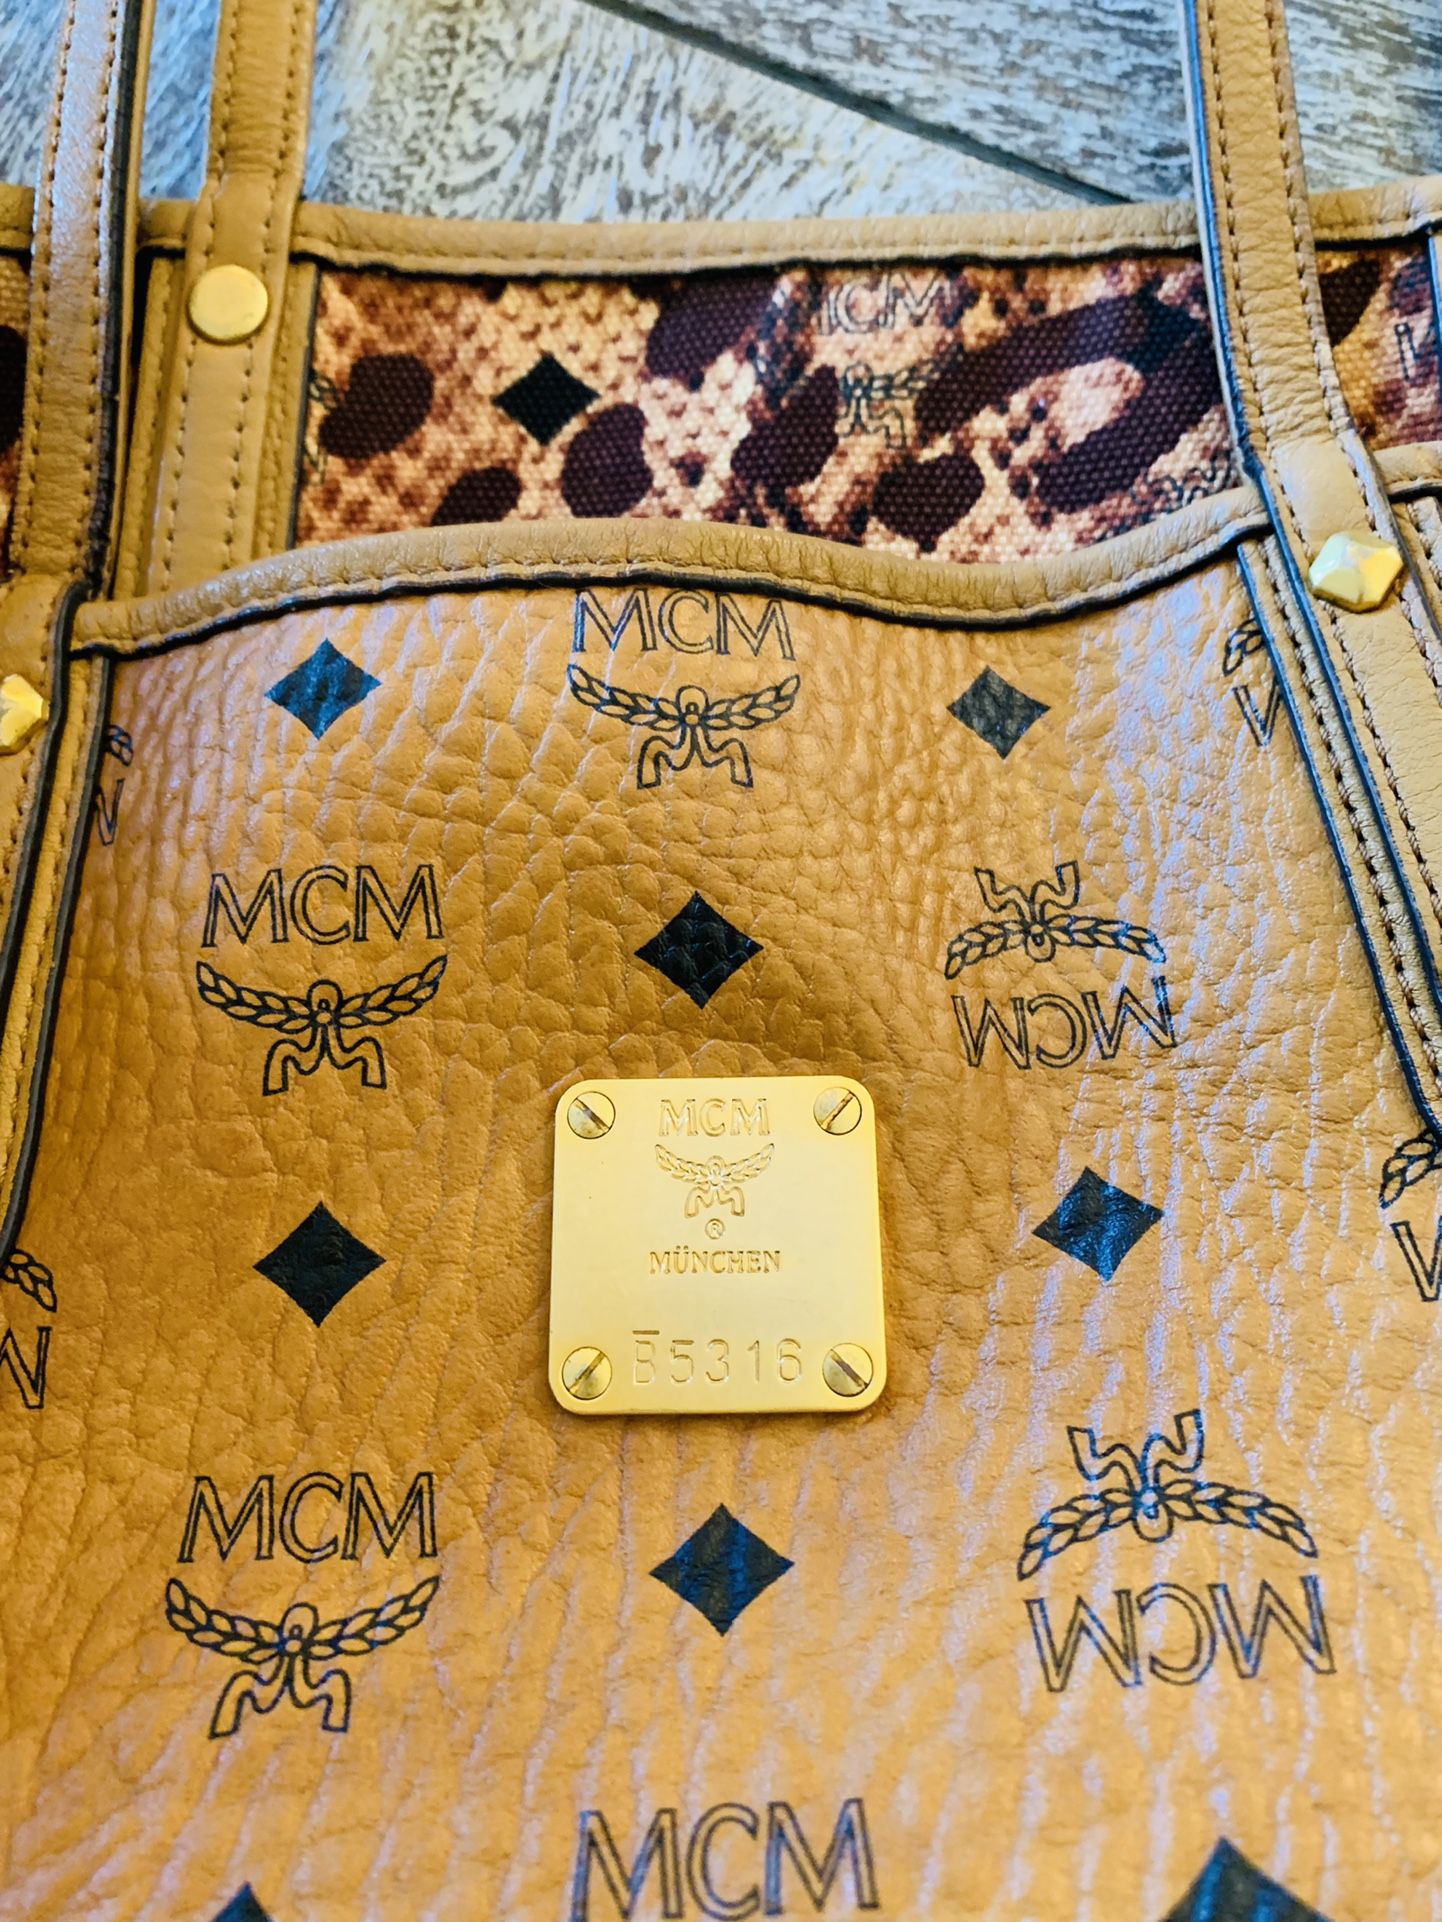 Mcm Medium Size Shoppers Bag for Sale in San Diego, CA - OfferUp